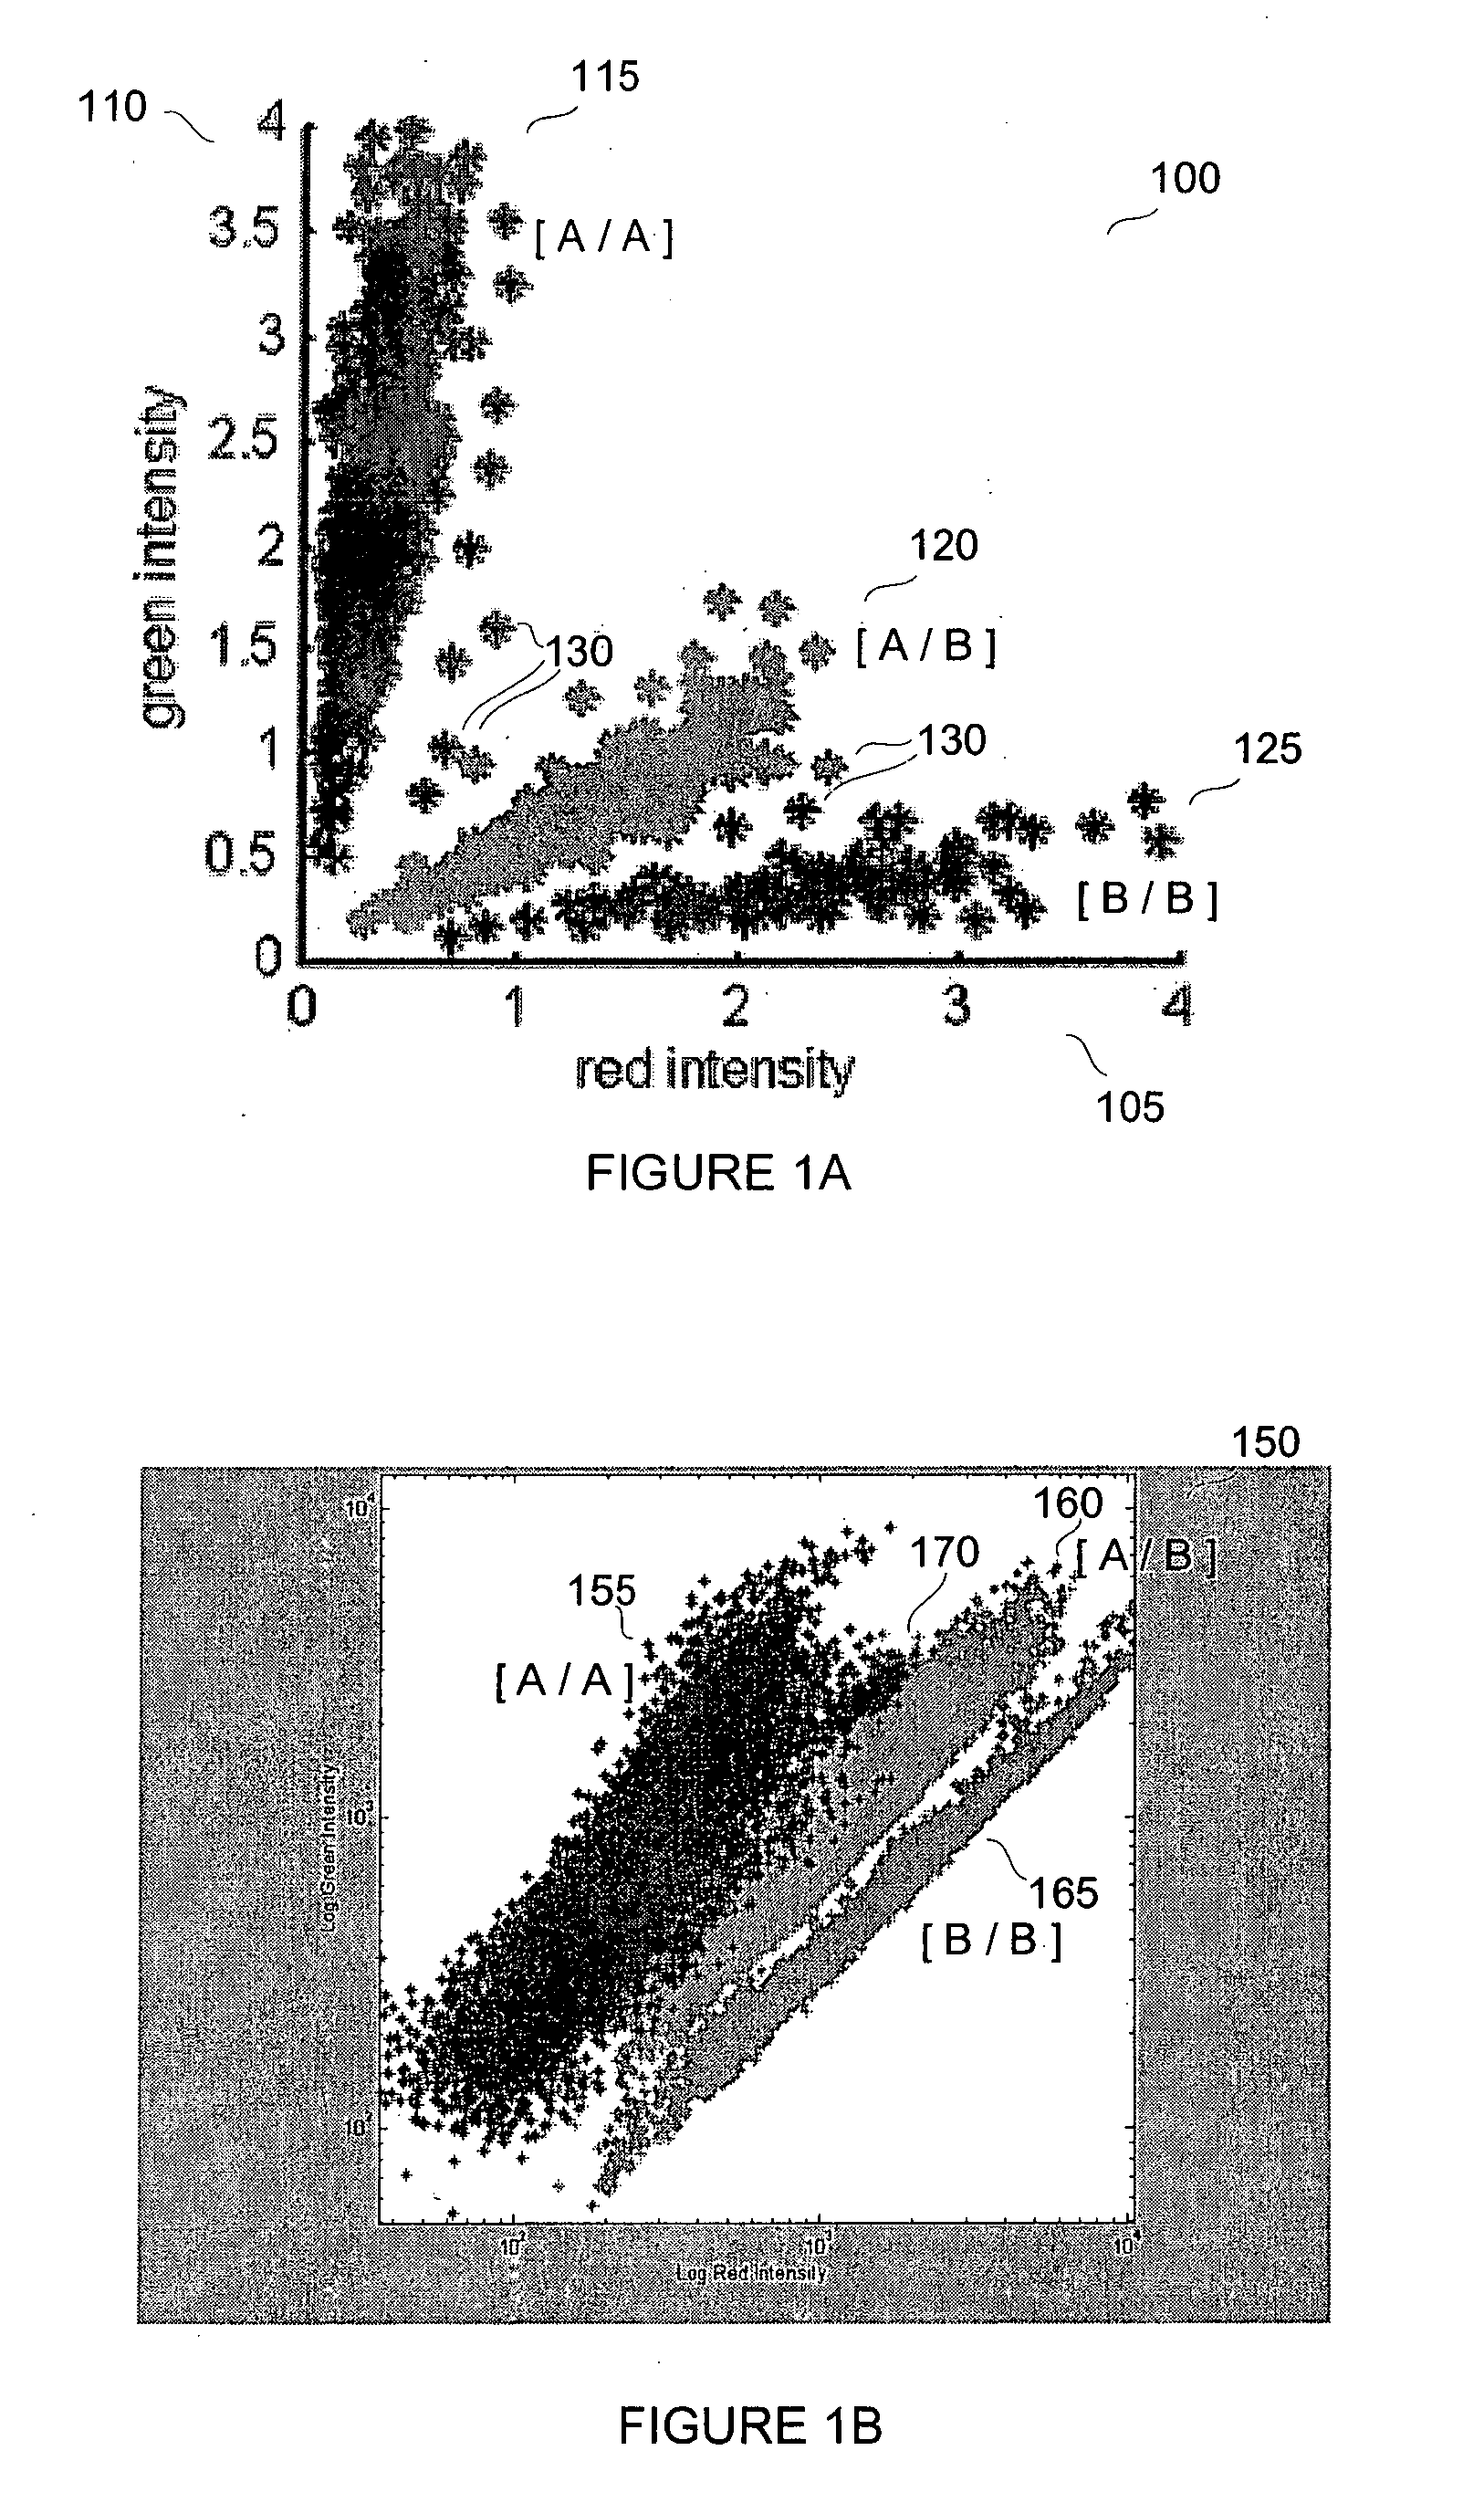 System and method for SNP genotype clustering